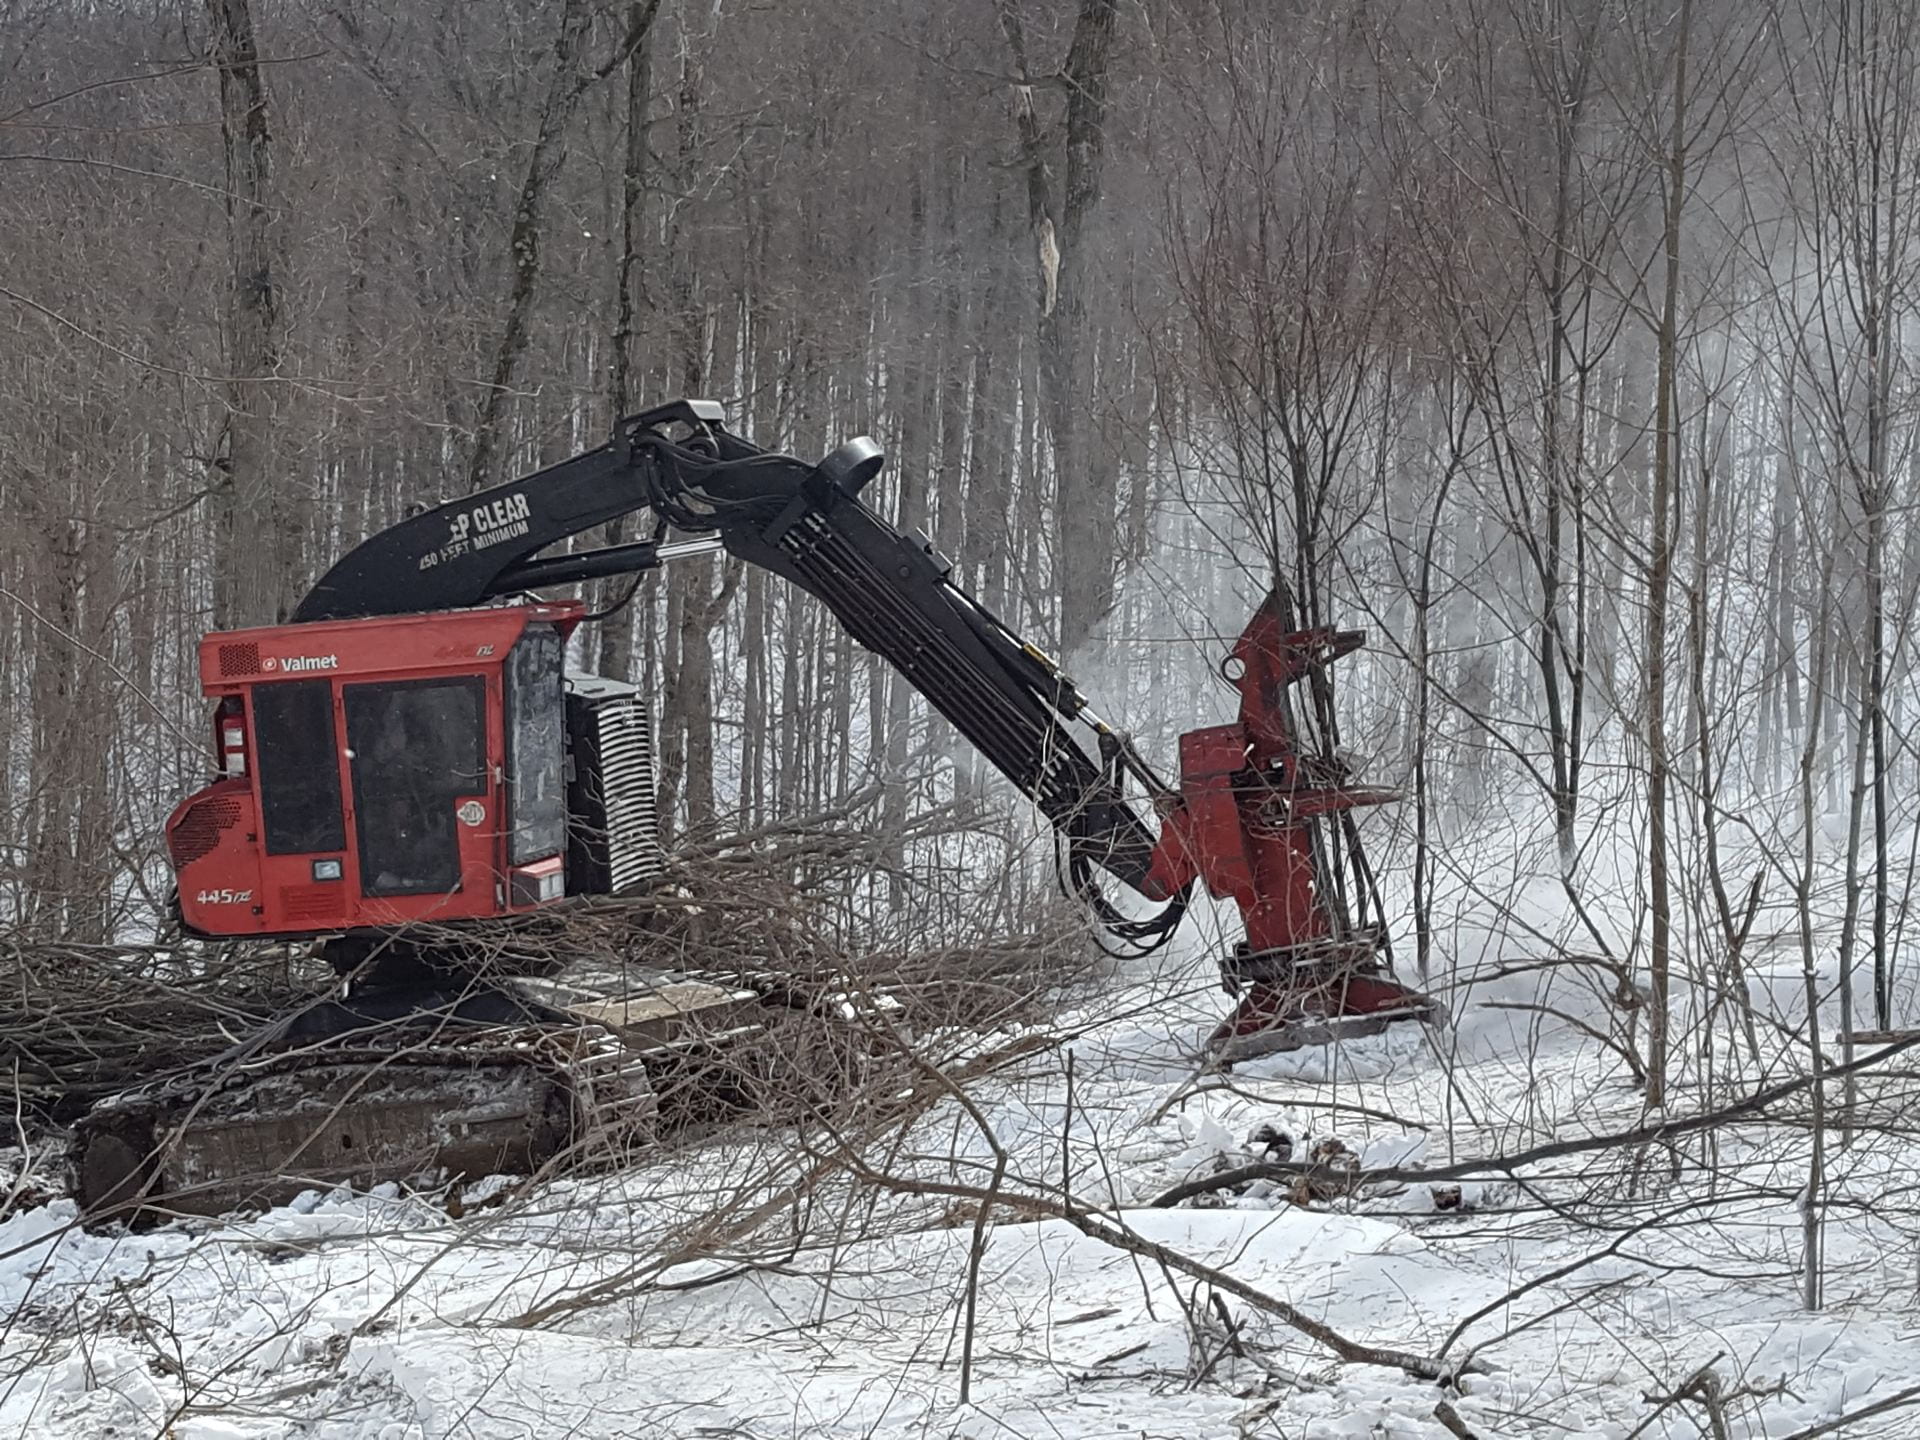 A feller-buncher can efficiently clear the understory, although it is most commonly used in harvesting larger trees. The cutting head allows for stems to be bunched at specific locations. 